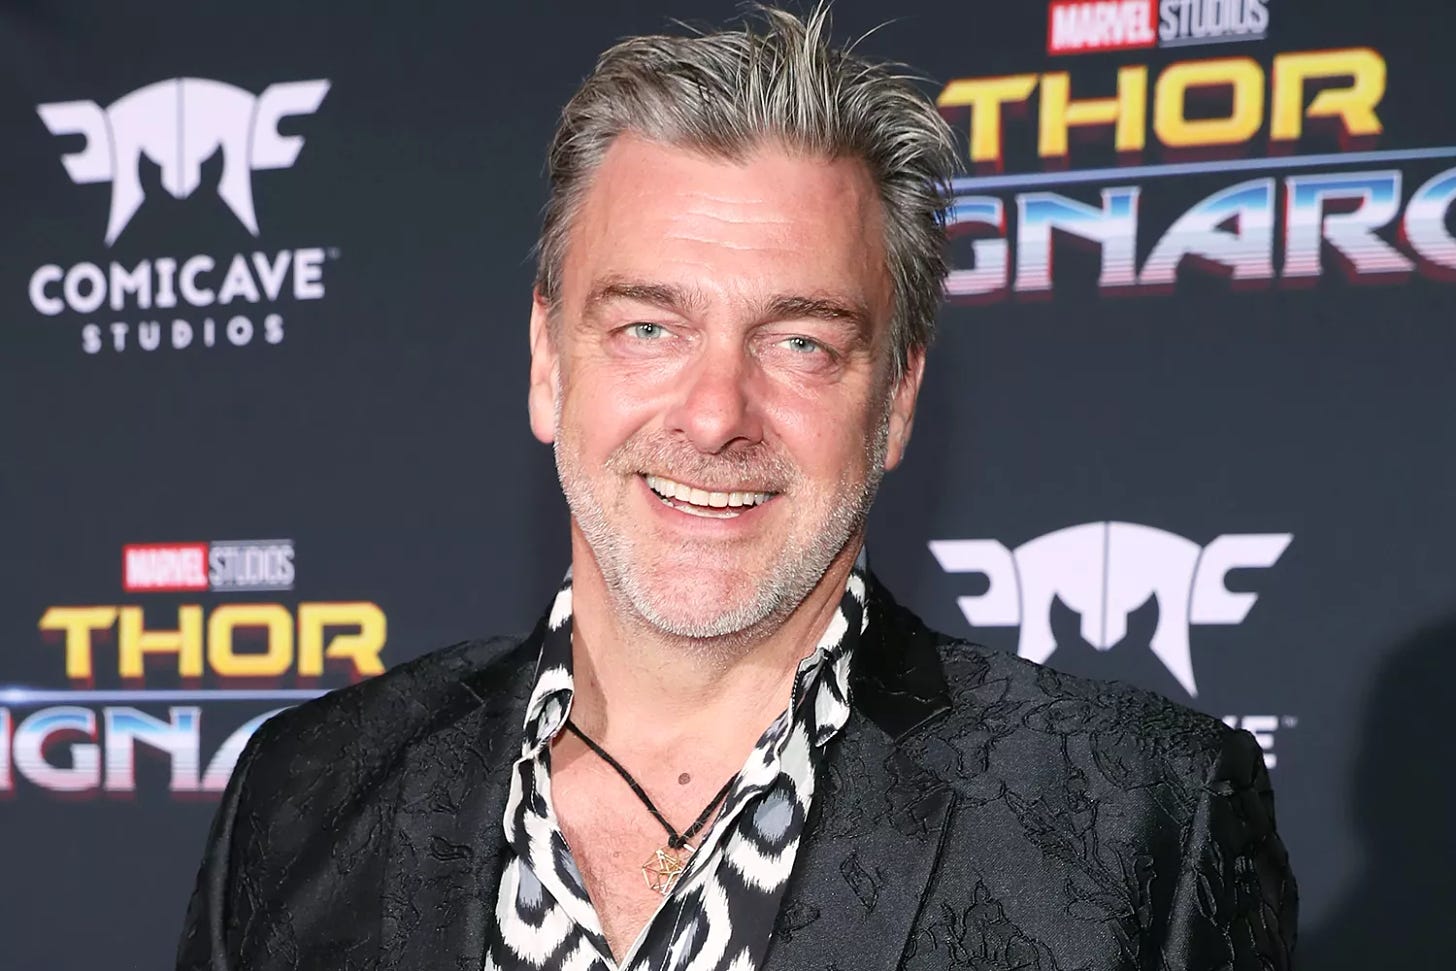 HOLLYWOOD, CA - OCTOBER 10: Actor Ray Stevenson at The World Premiere of Marvel Studios' "Thor: Ragnarok" at the El Capitan Theatre on October 10, 2017 in Hollywood, California. (Photo by Rich Polk/Getty Images for Disney)